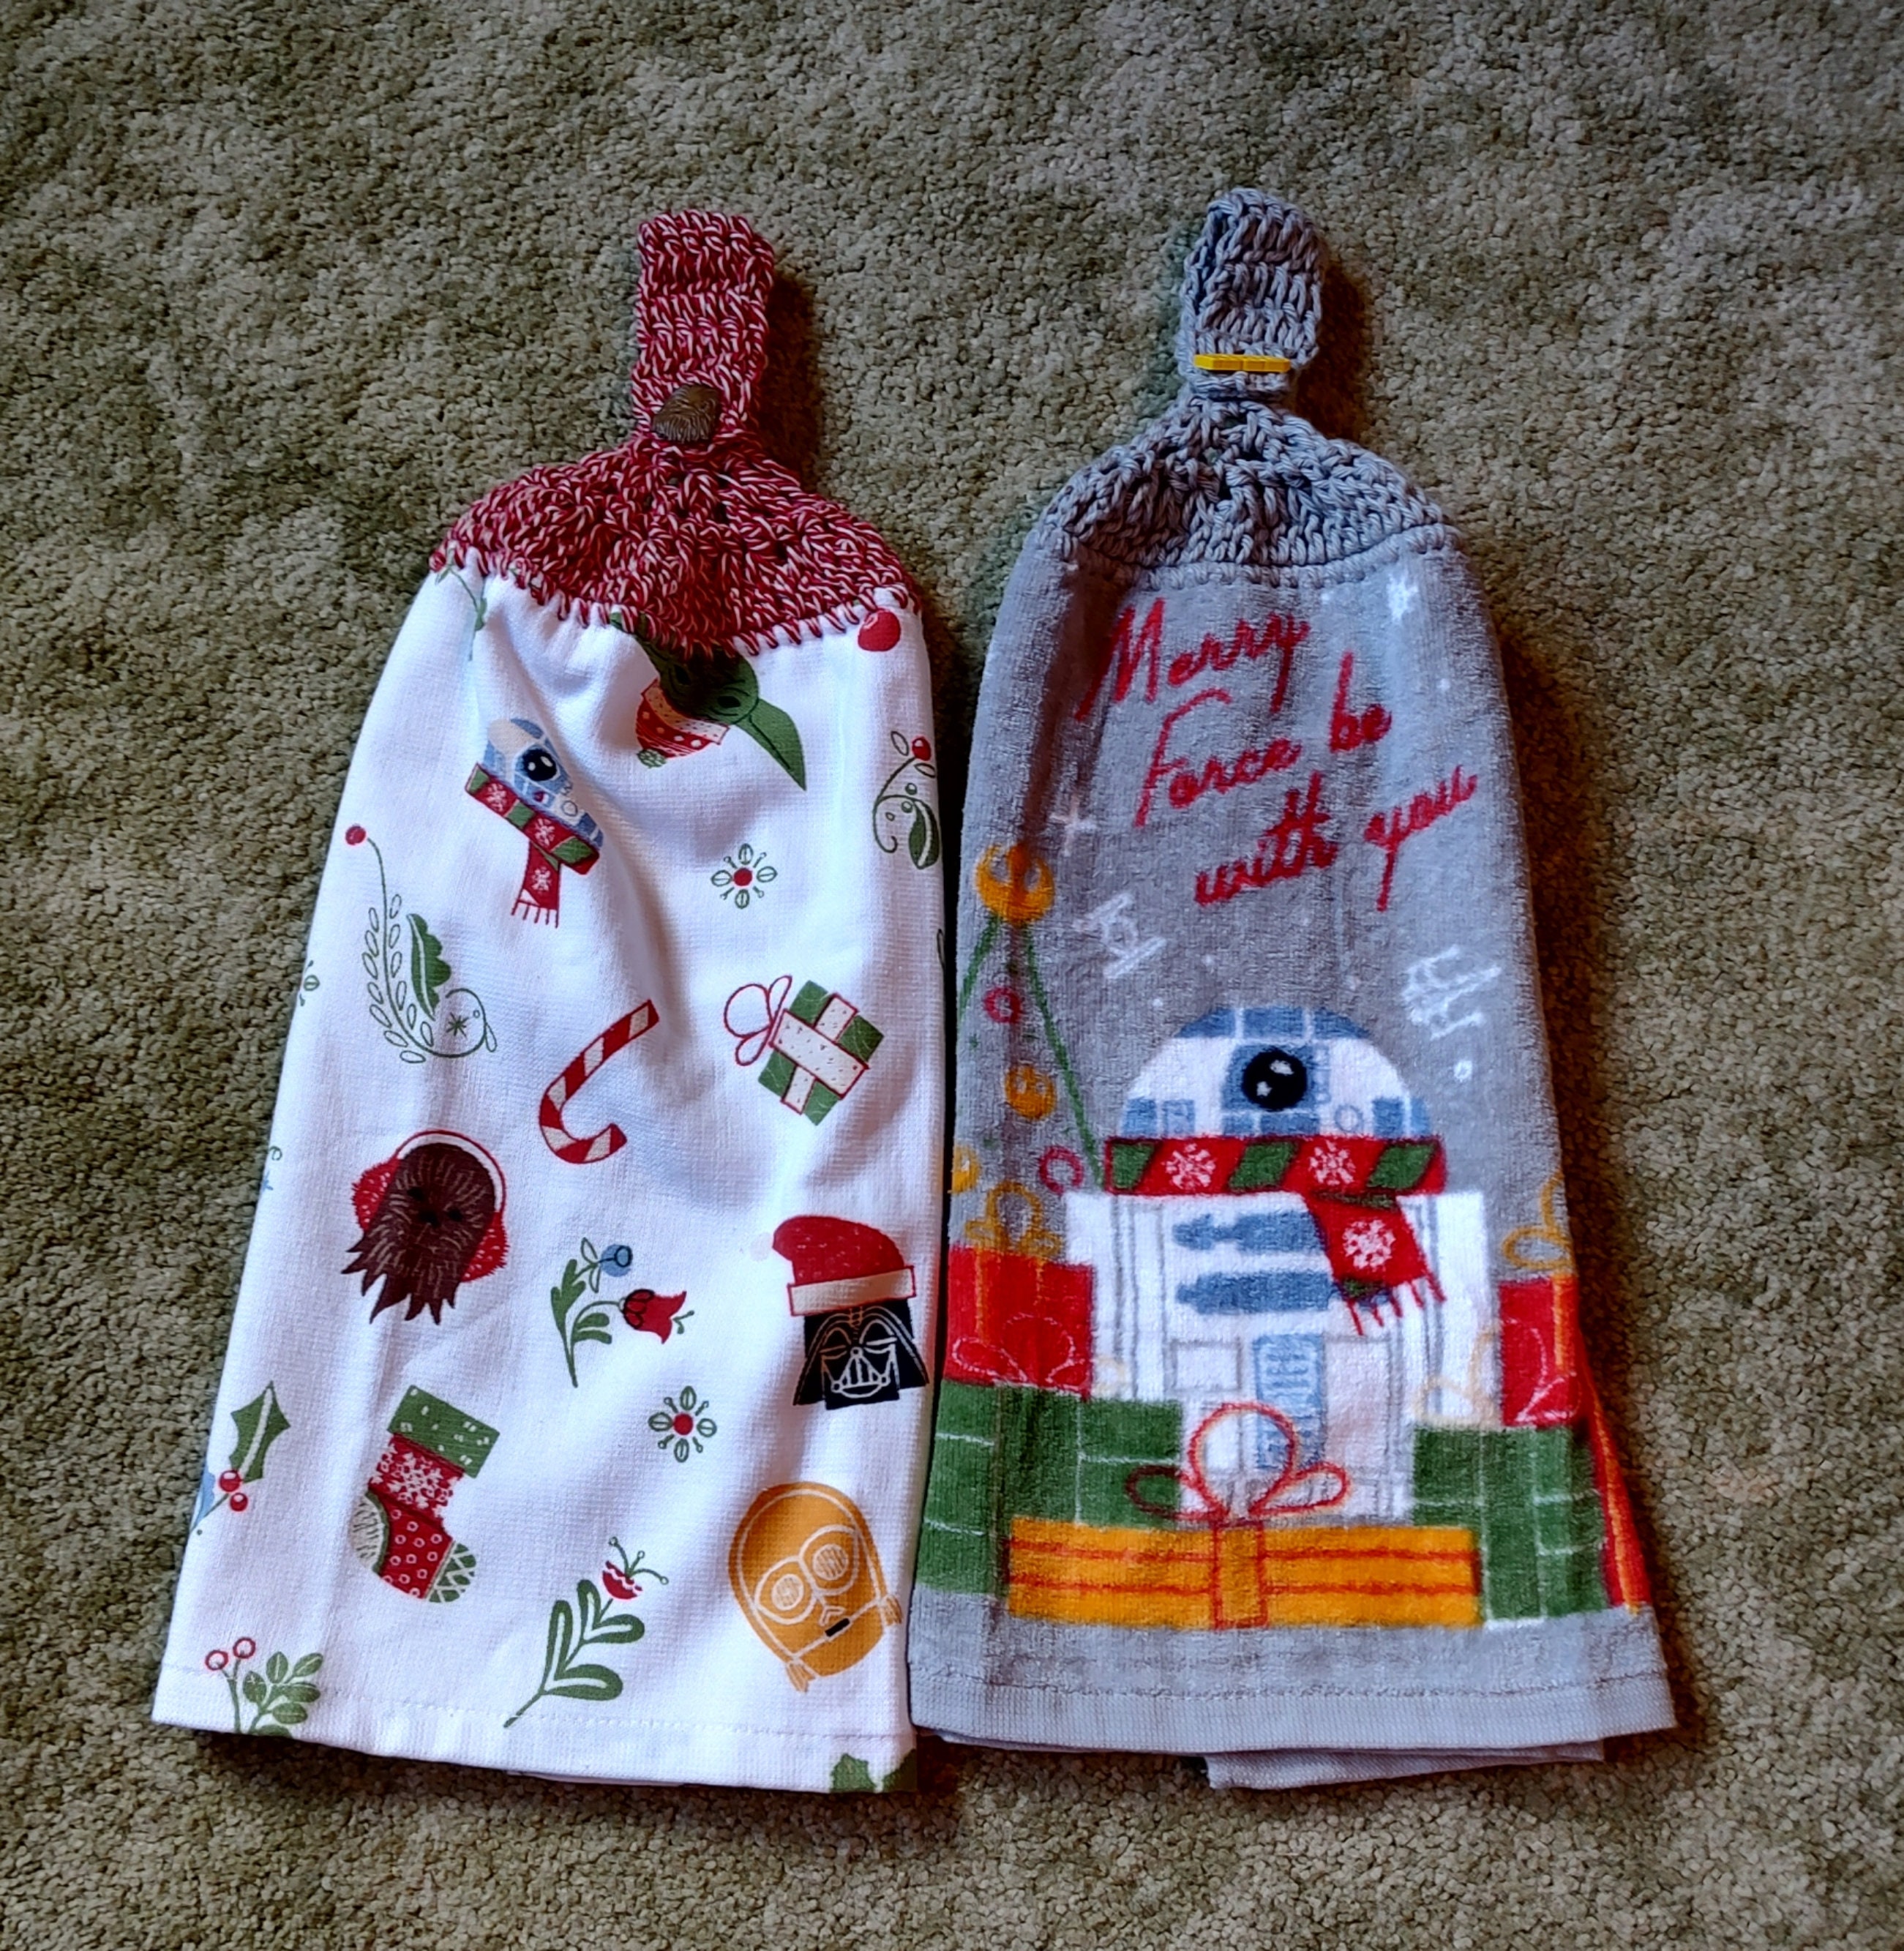 Star Wars Droids BB8 & R2D2 Personalized Dish Kitchen Hand Towels ANY COLOR